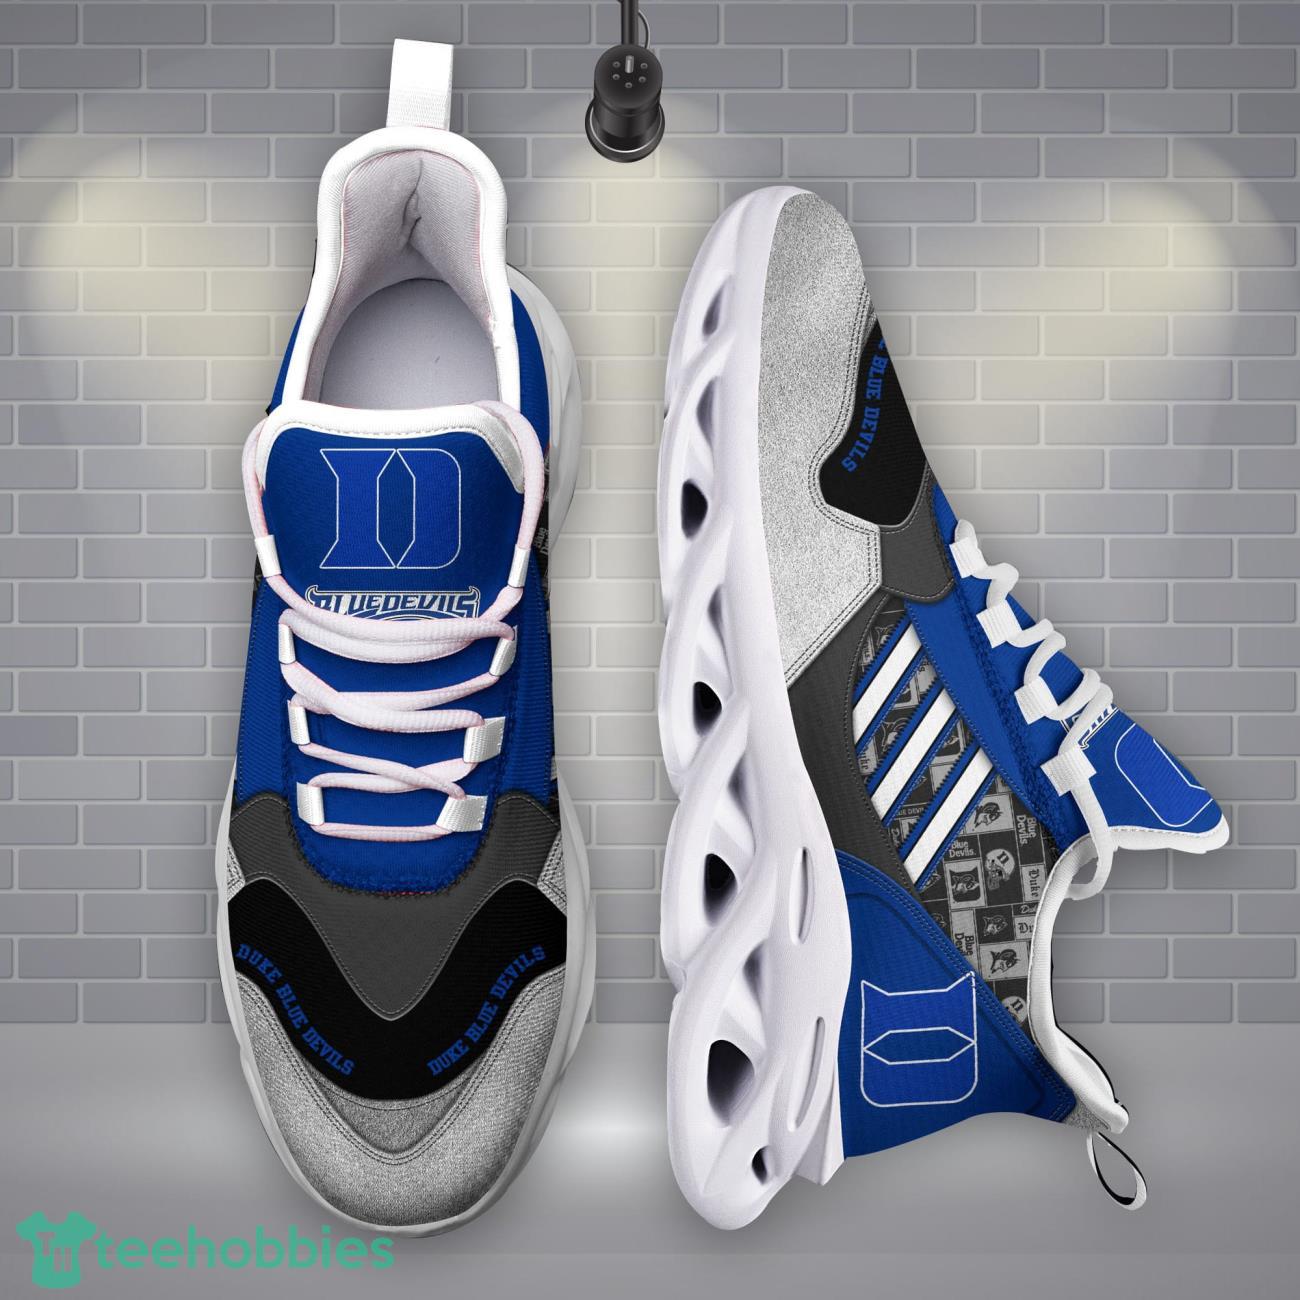 Duke Blue Devils NCAA2 Logo Sport Team Max Soul Shoes Clunky Running Sneakers Product Photo 1